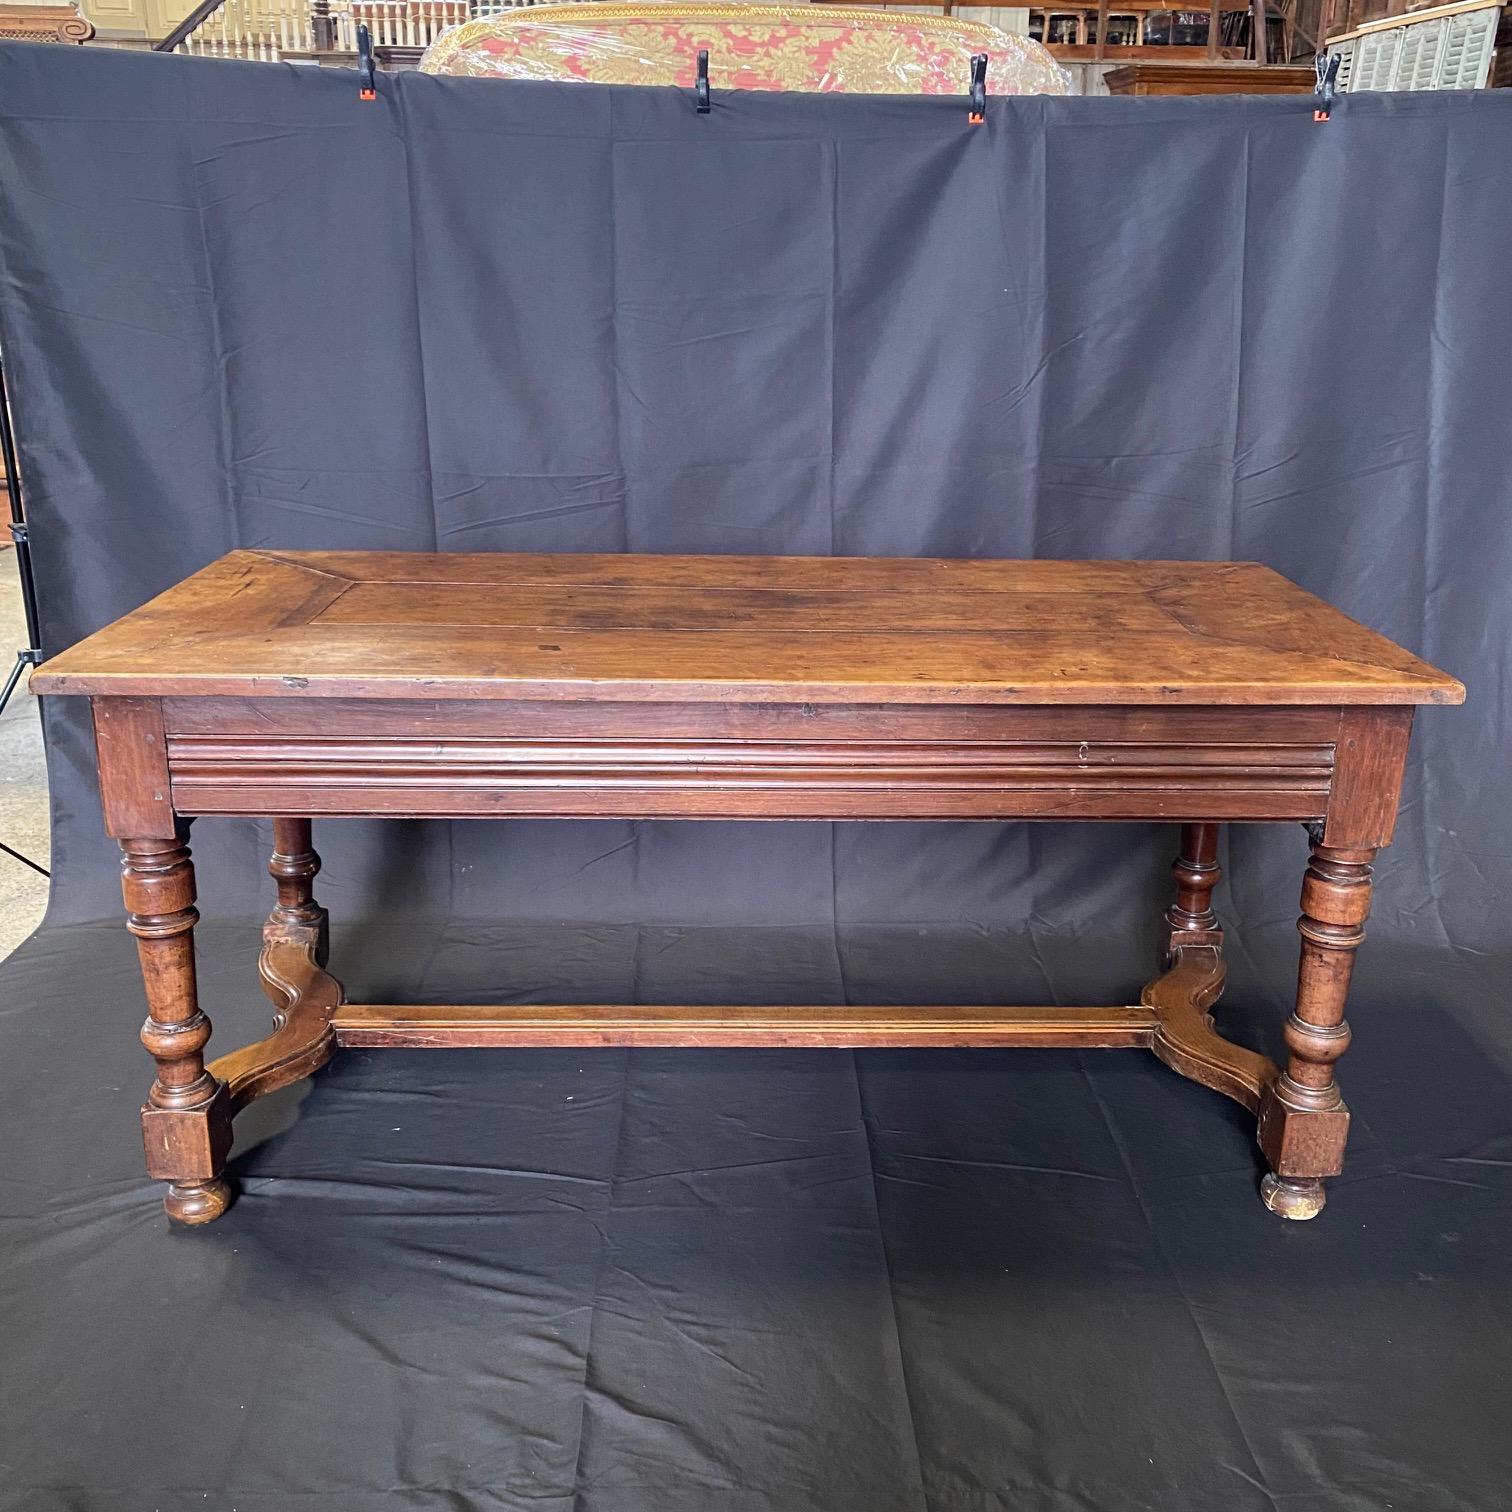 Antique Country French dining table was found in Avignon, France and is a great medium size - can serve as a dining table or impressive desk! The top is lovely; fashioned from five expertly joined solid planks of old-growth walnut to last for